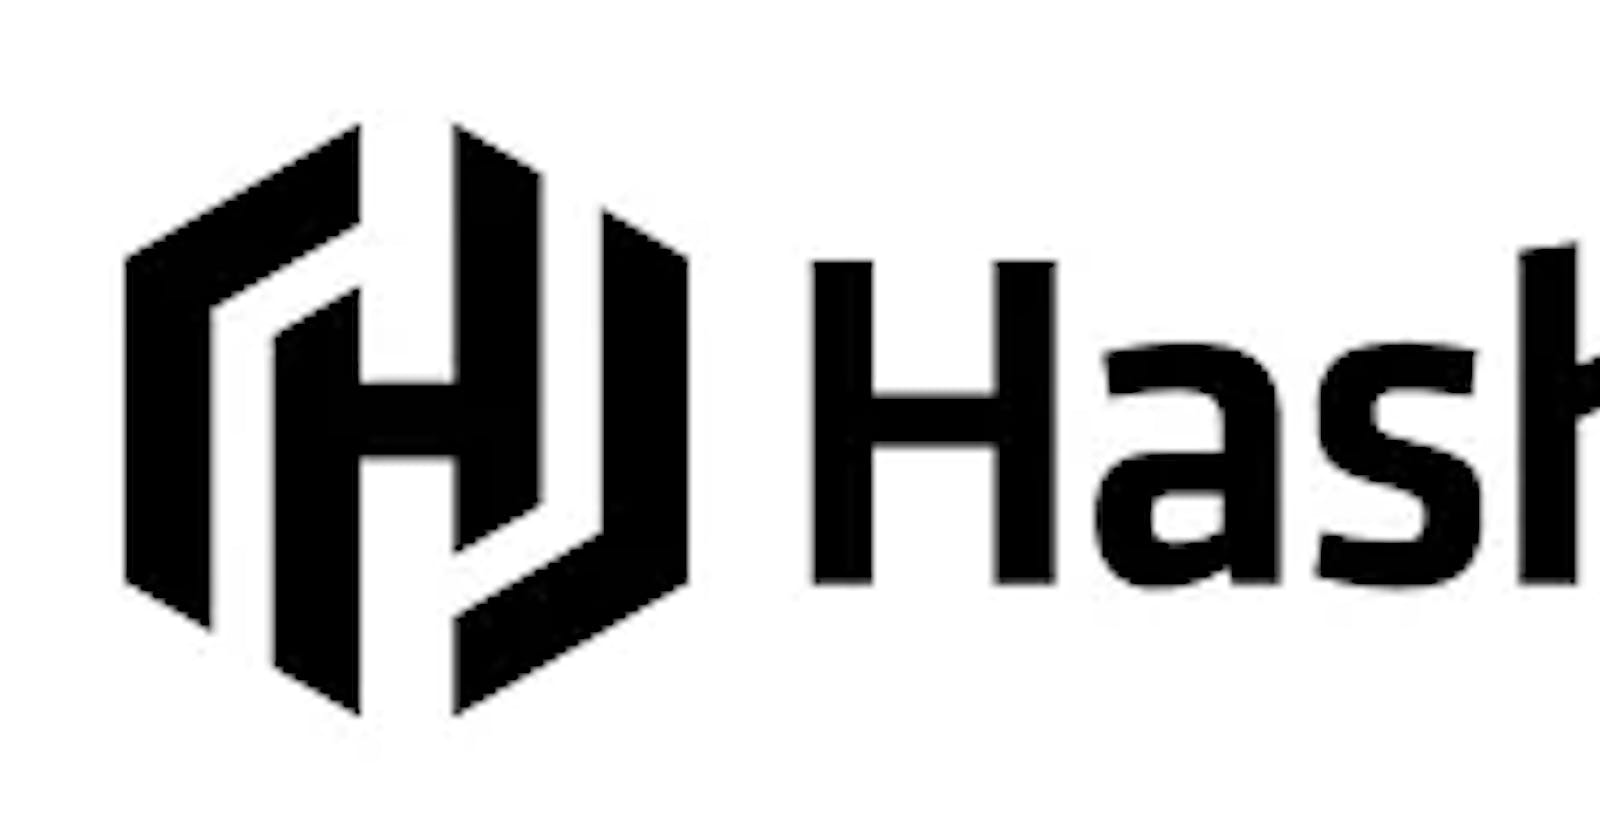 Deploy Hashicorp Vault to store Keys and KES for encryption with Minio for object storage using Helm package manager